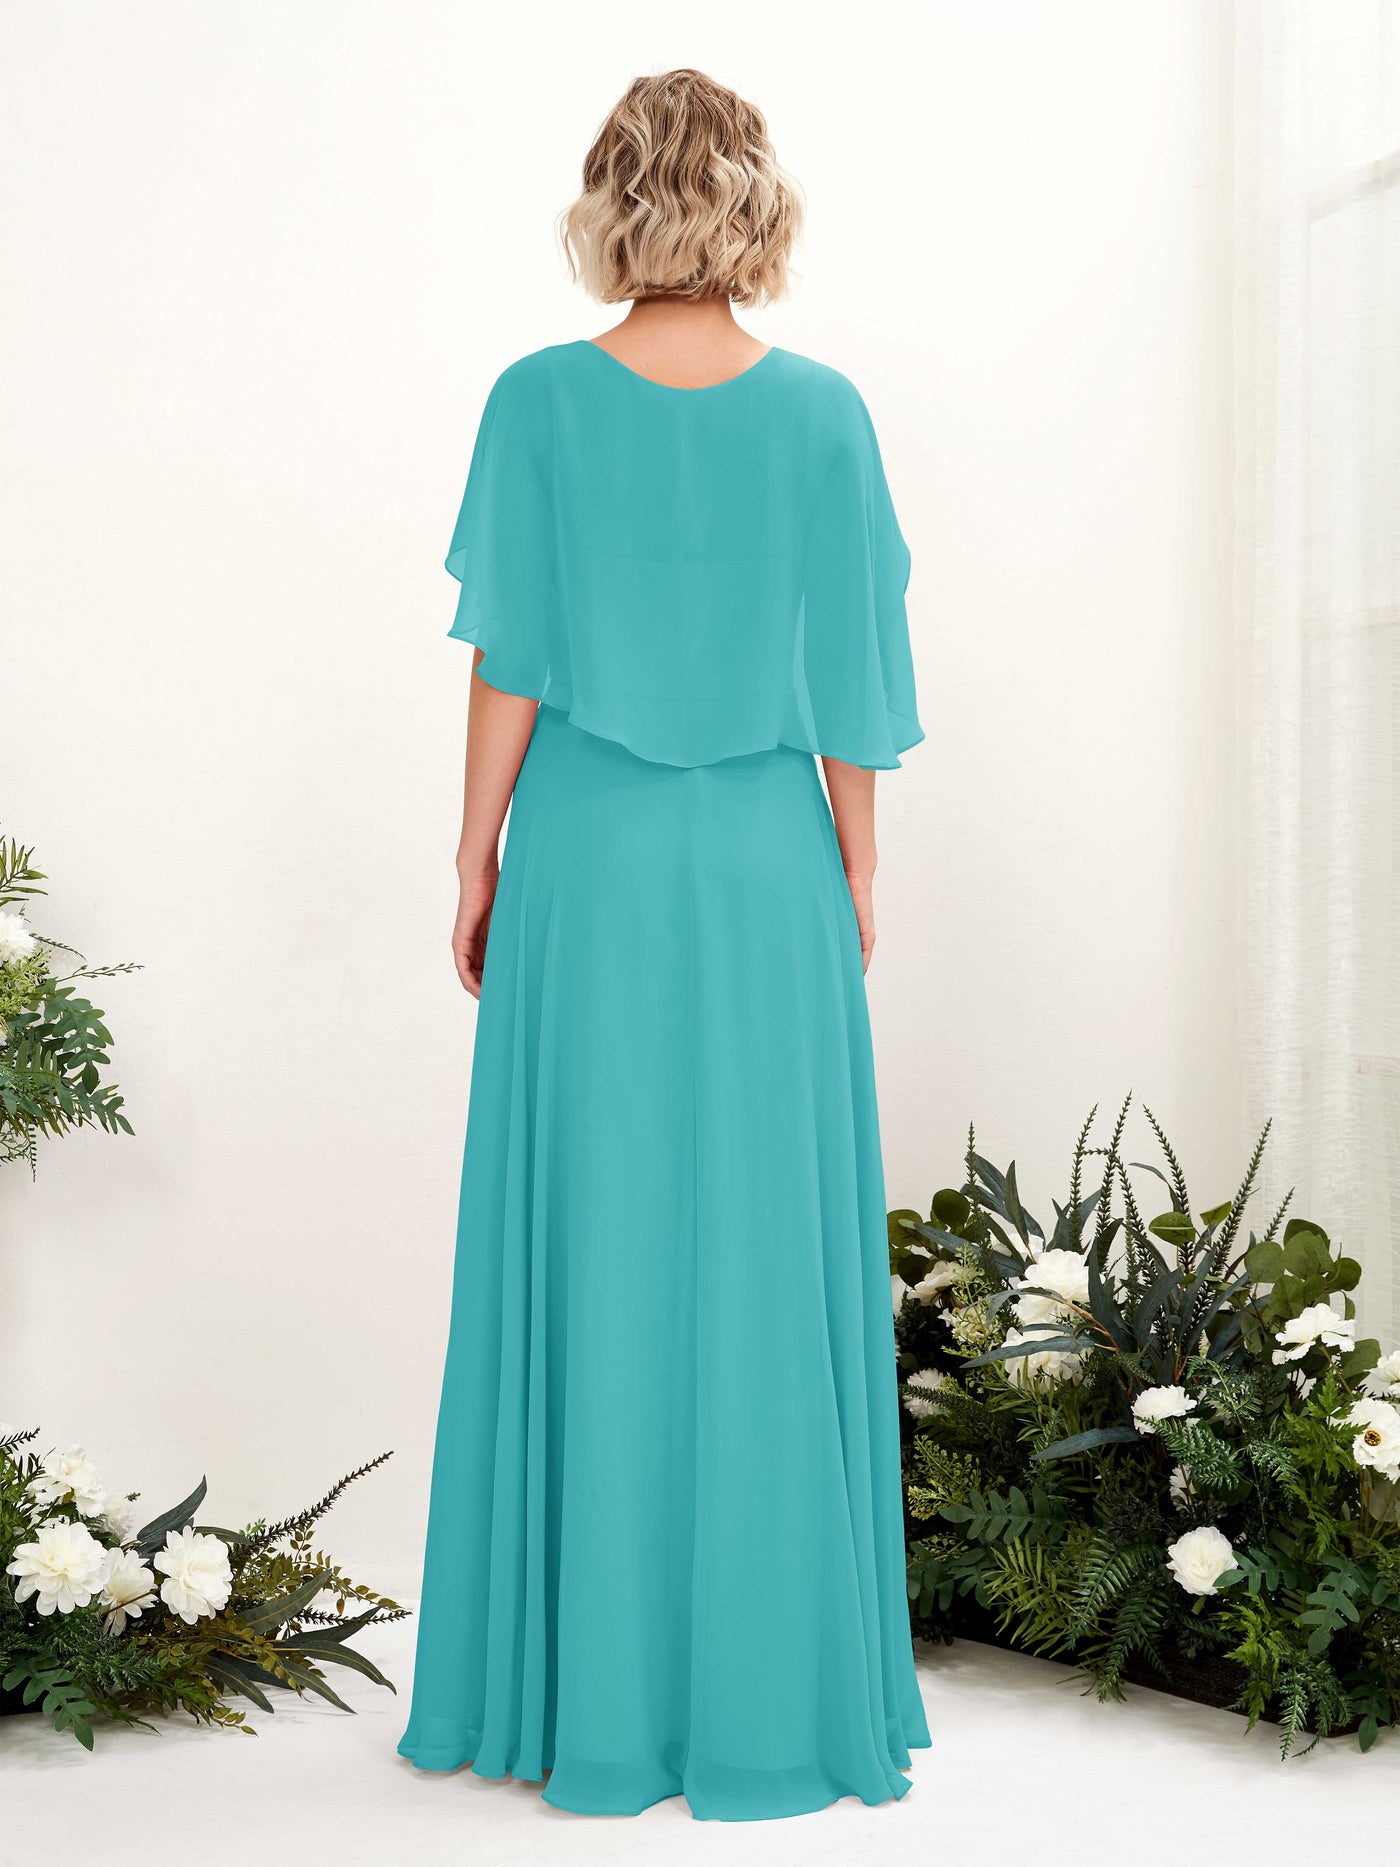 Turquoise Bridesmaid Dresses Bridesmaid Dress A-line Chiffon V-neck Full Length Short Sleeves Wedding Party Dress (81224423)#color_turquoise